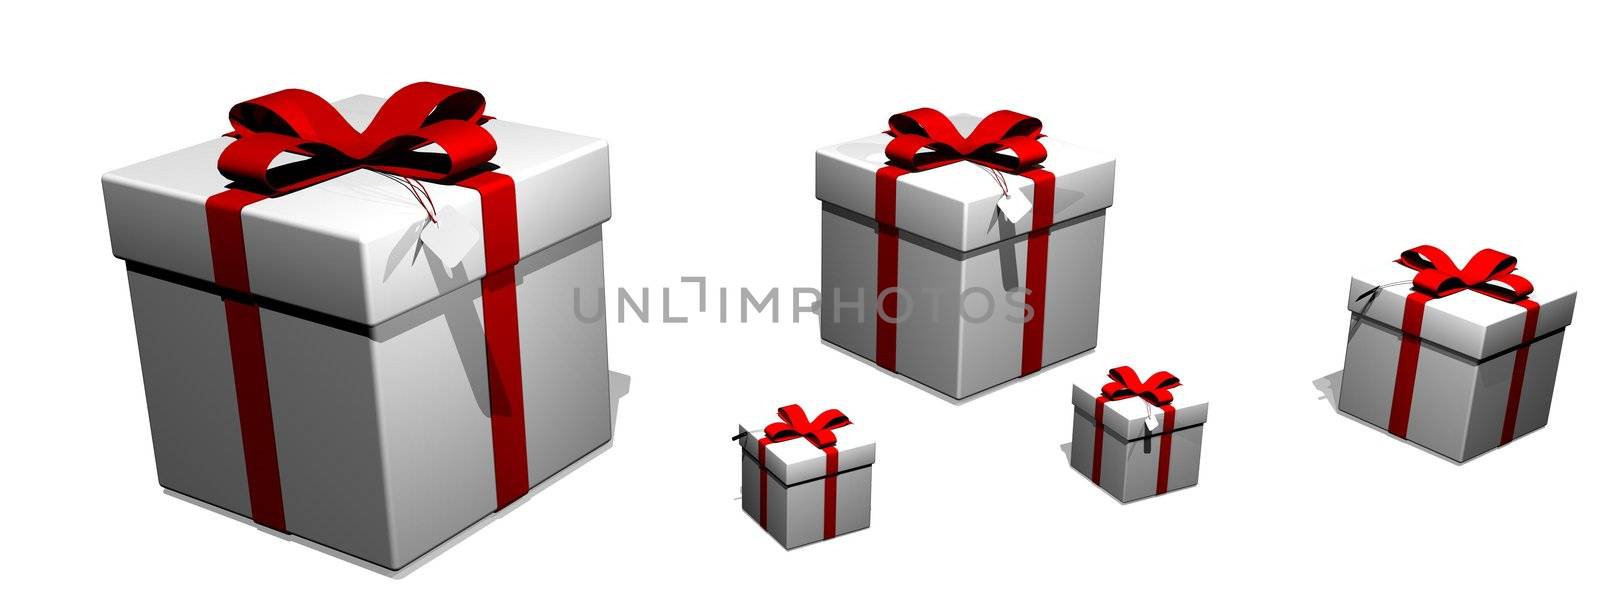 Several big and small gift boxes with red ribbon and white label